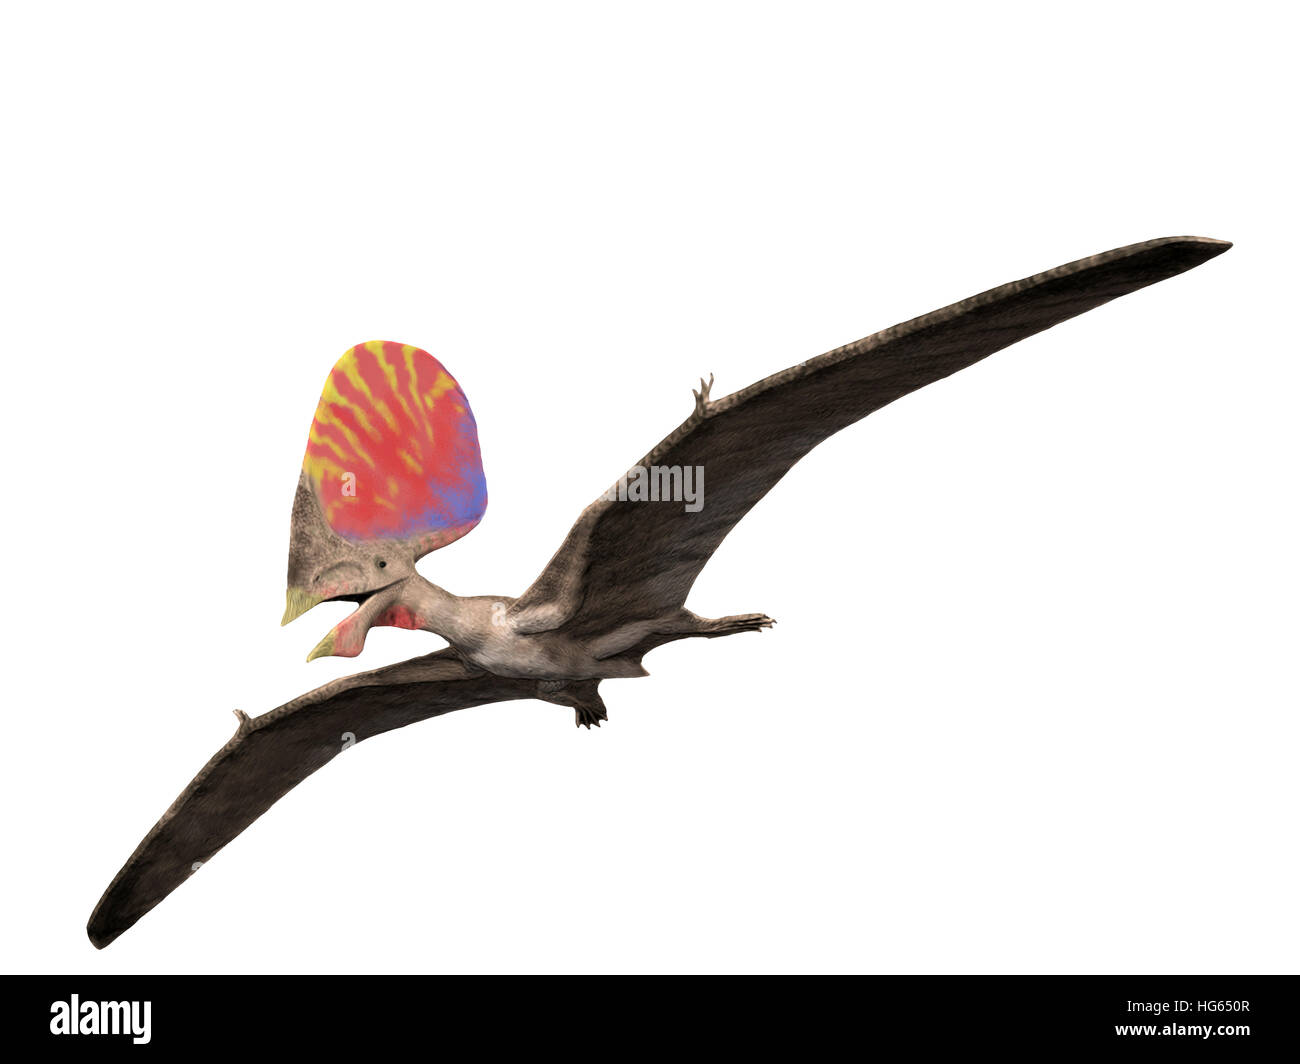 Pterodactyl, Illustration - Stock Image - C027/4502 - Science Photo Library